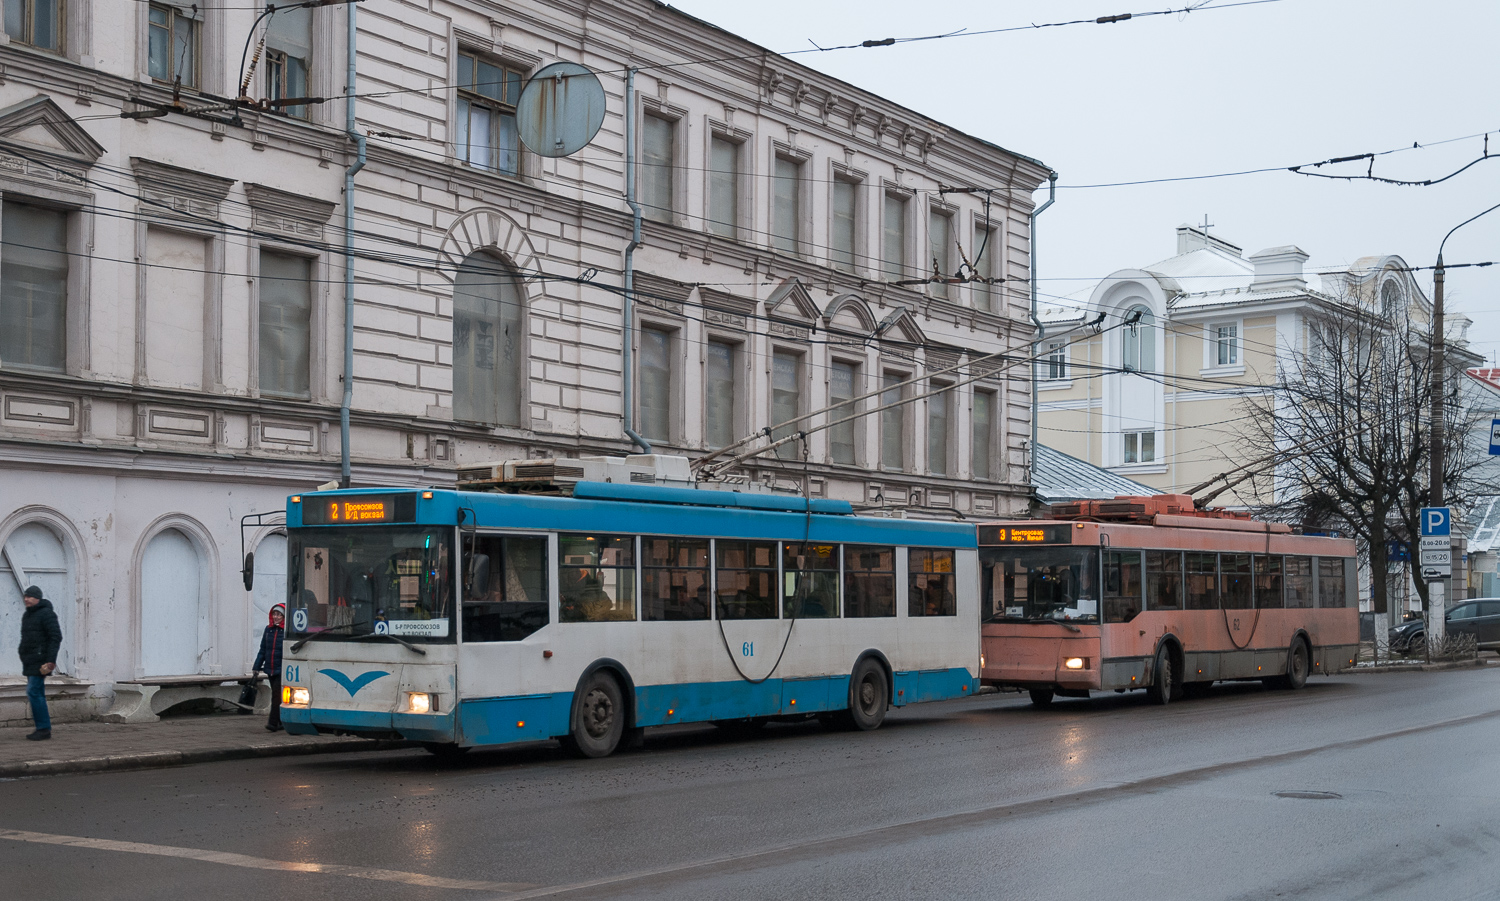 Tver, Trolza-5275.05 “Optima” N°. 61; Tver — Trolleybus lines: Central district